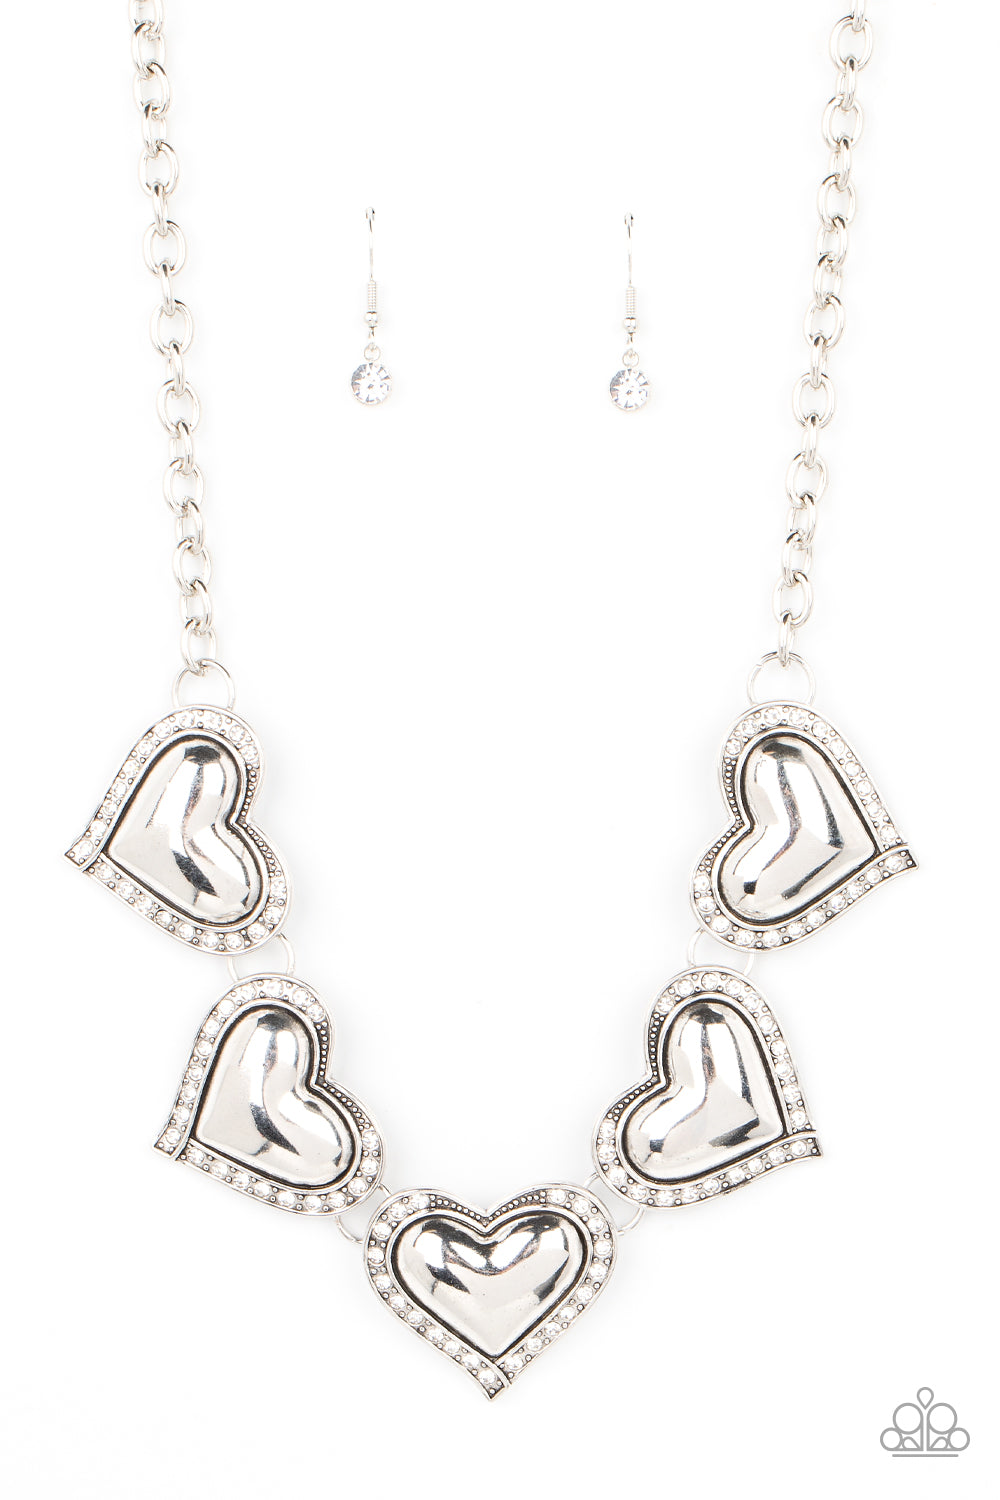 Kindred Hearts - White Necklace